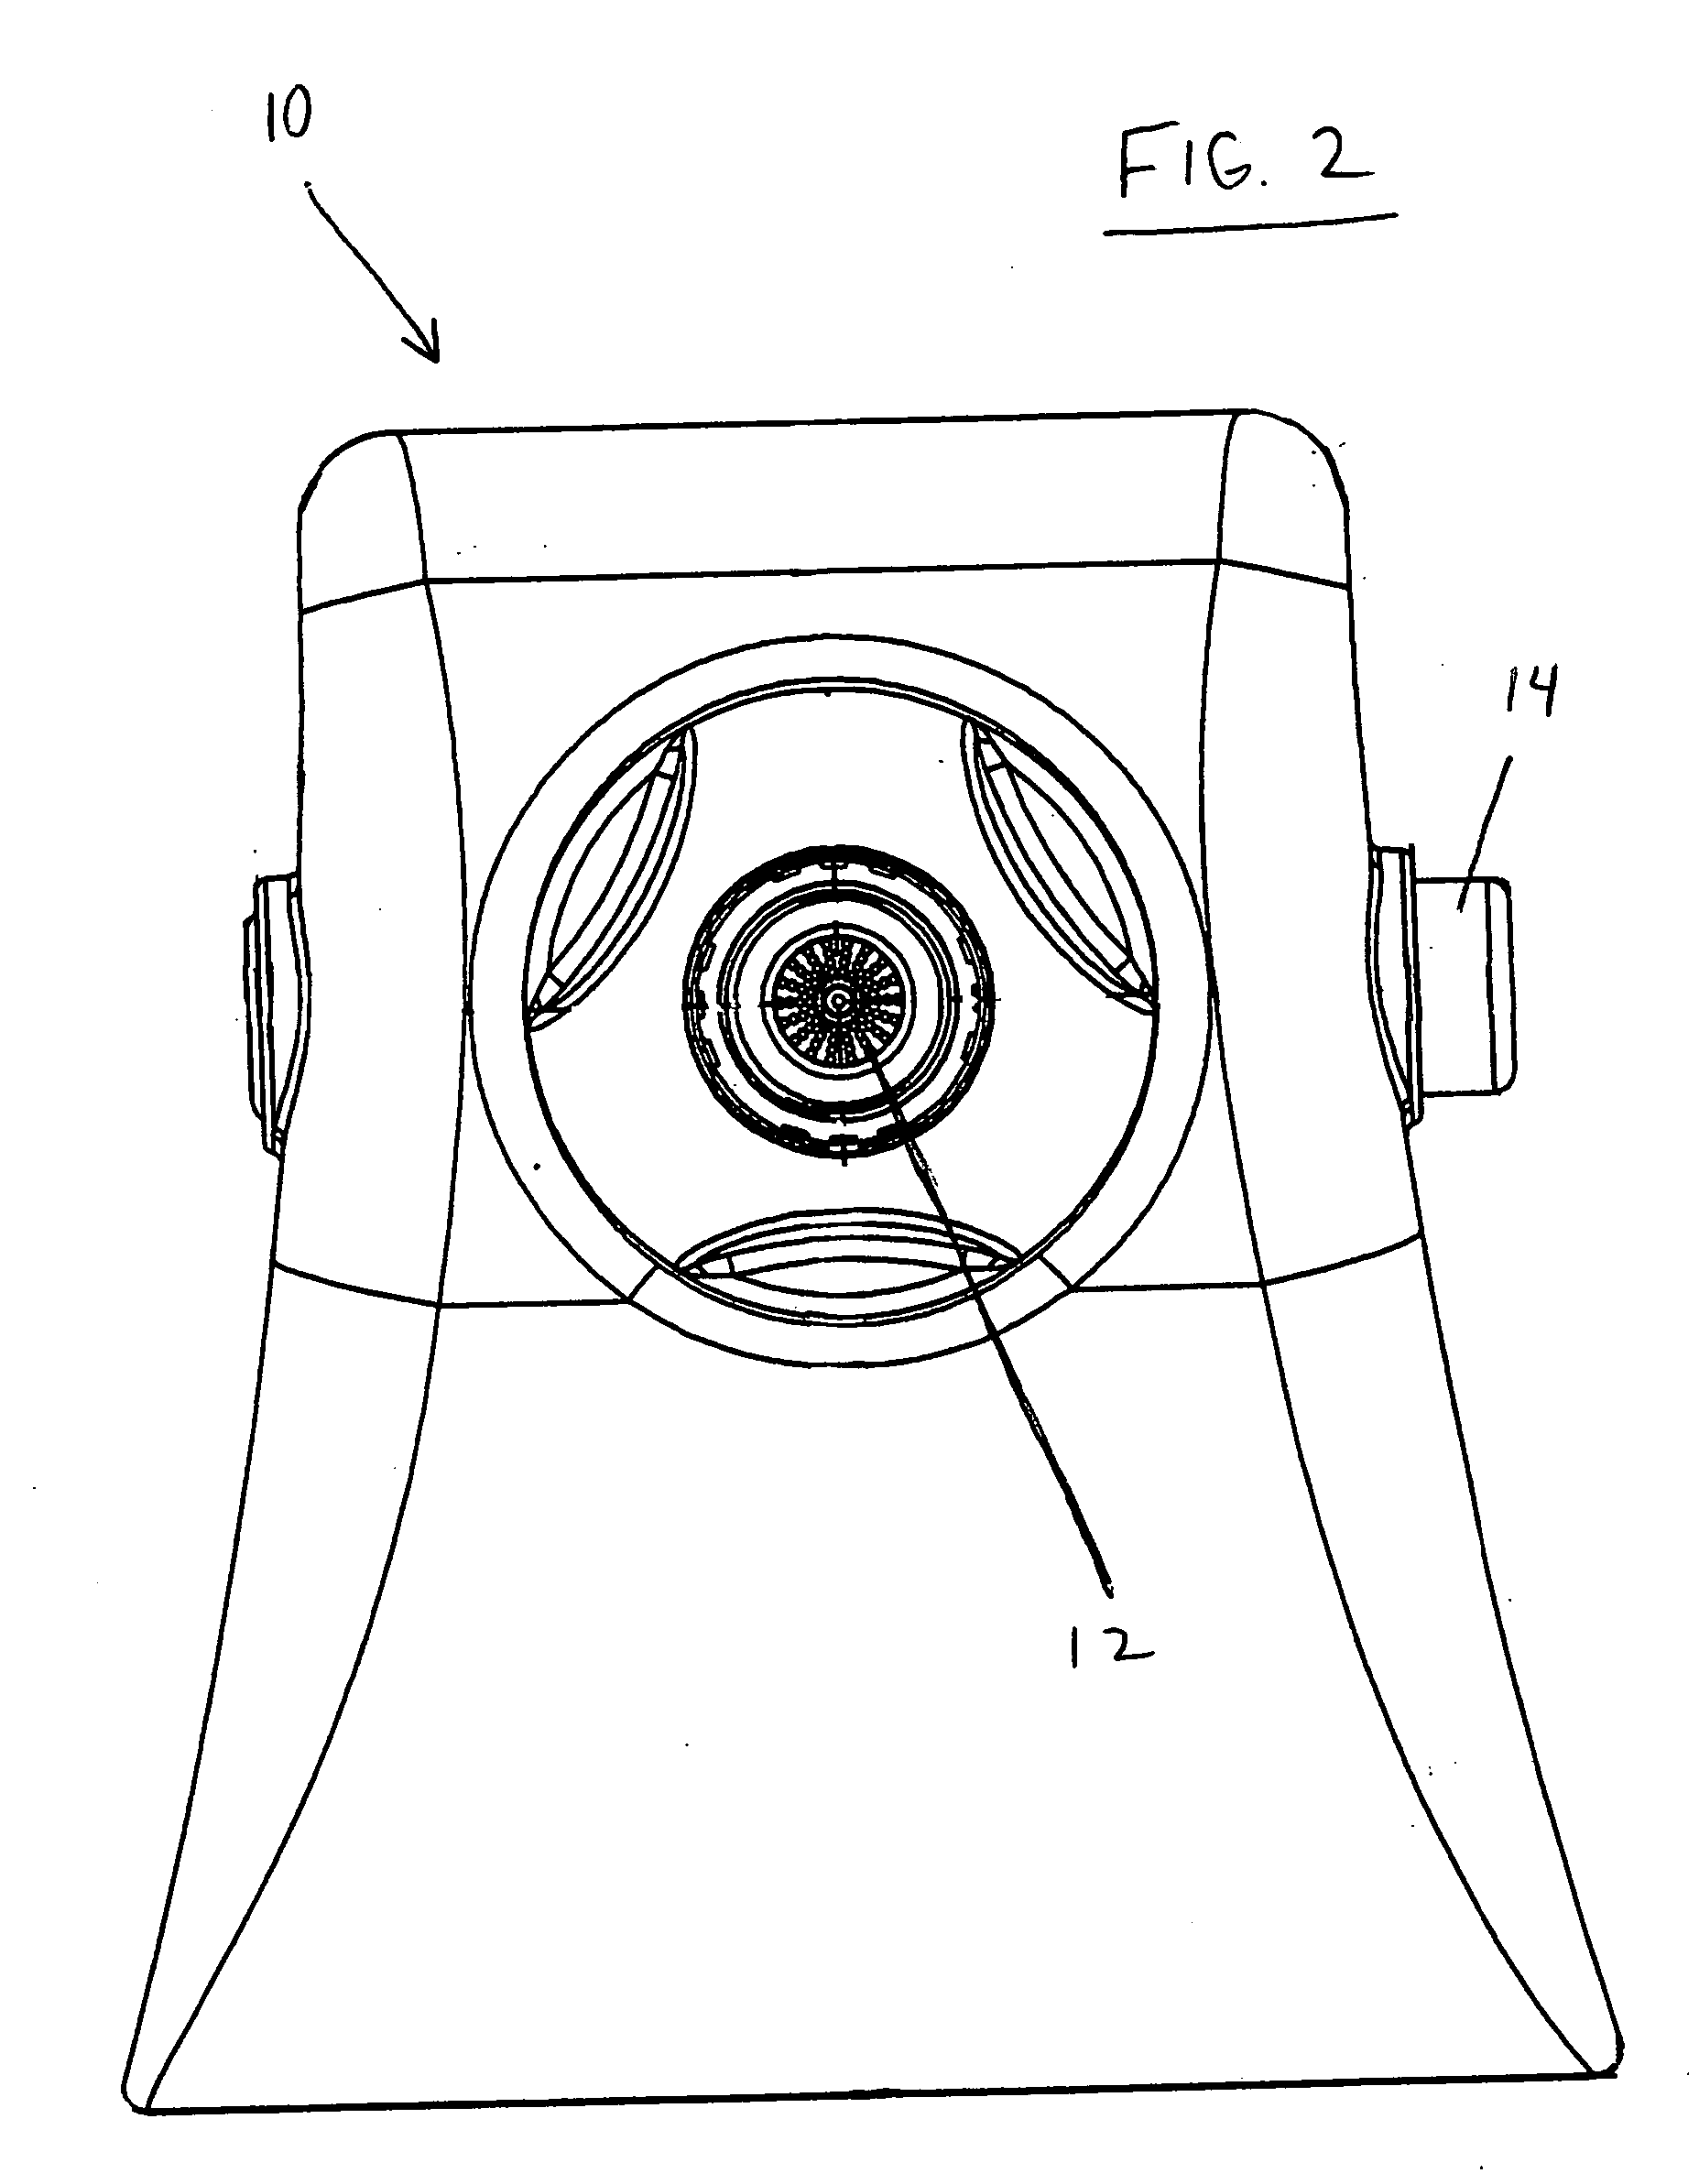 Combination showerhead with waterfall nozzle